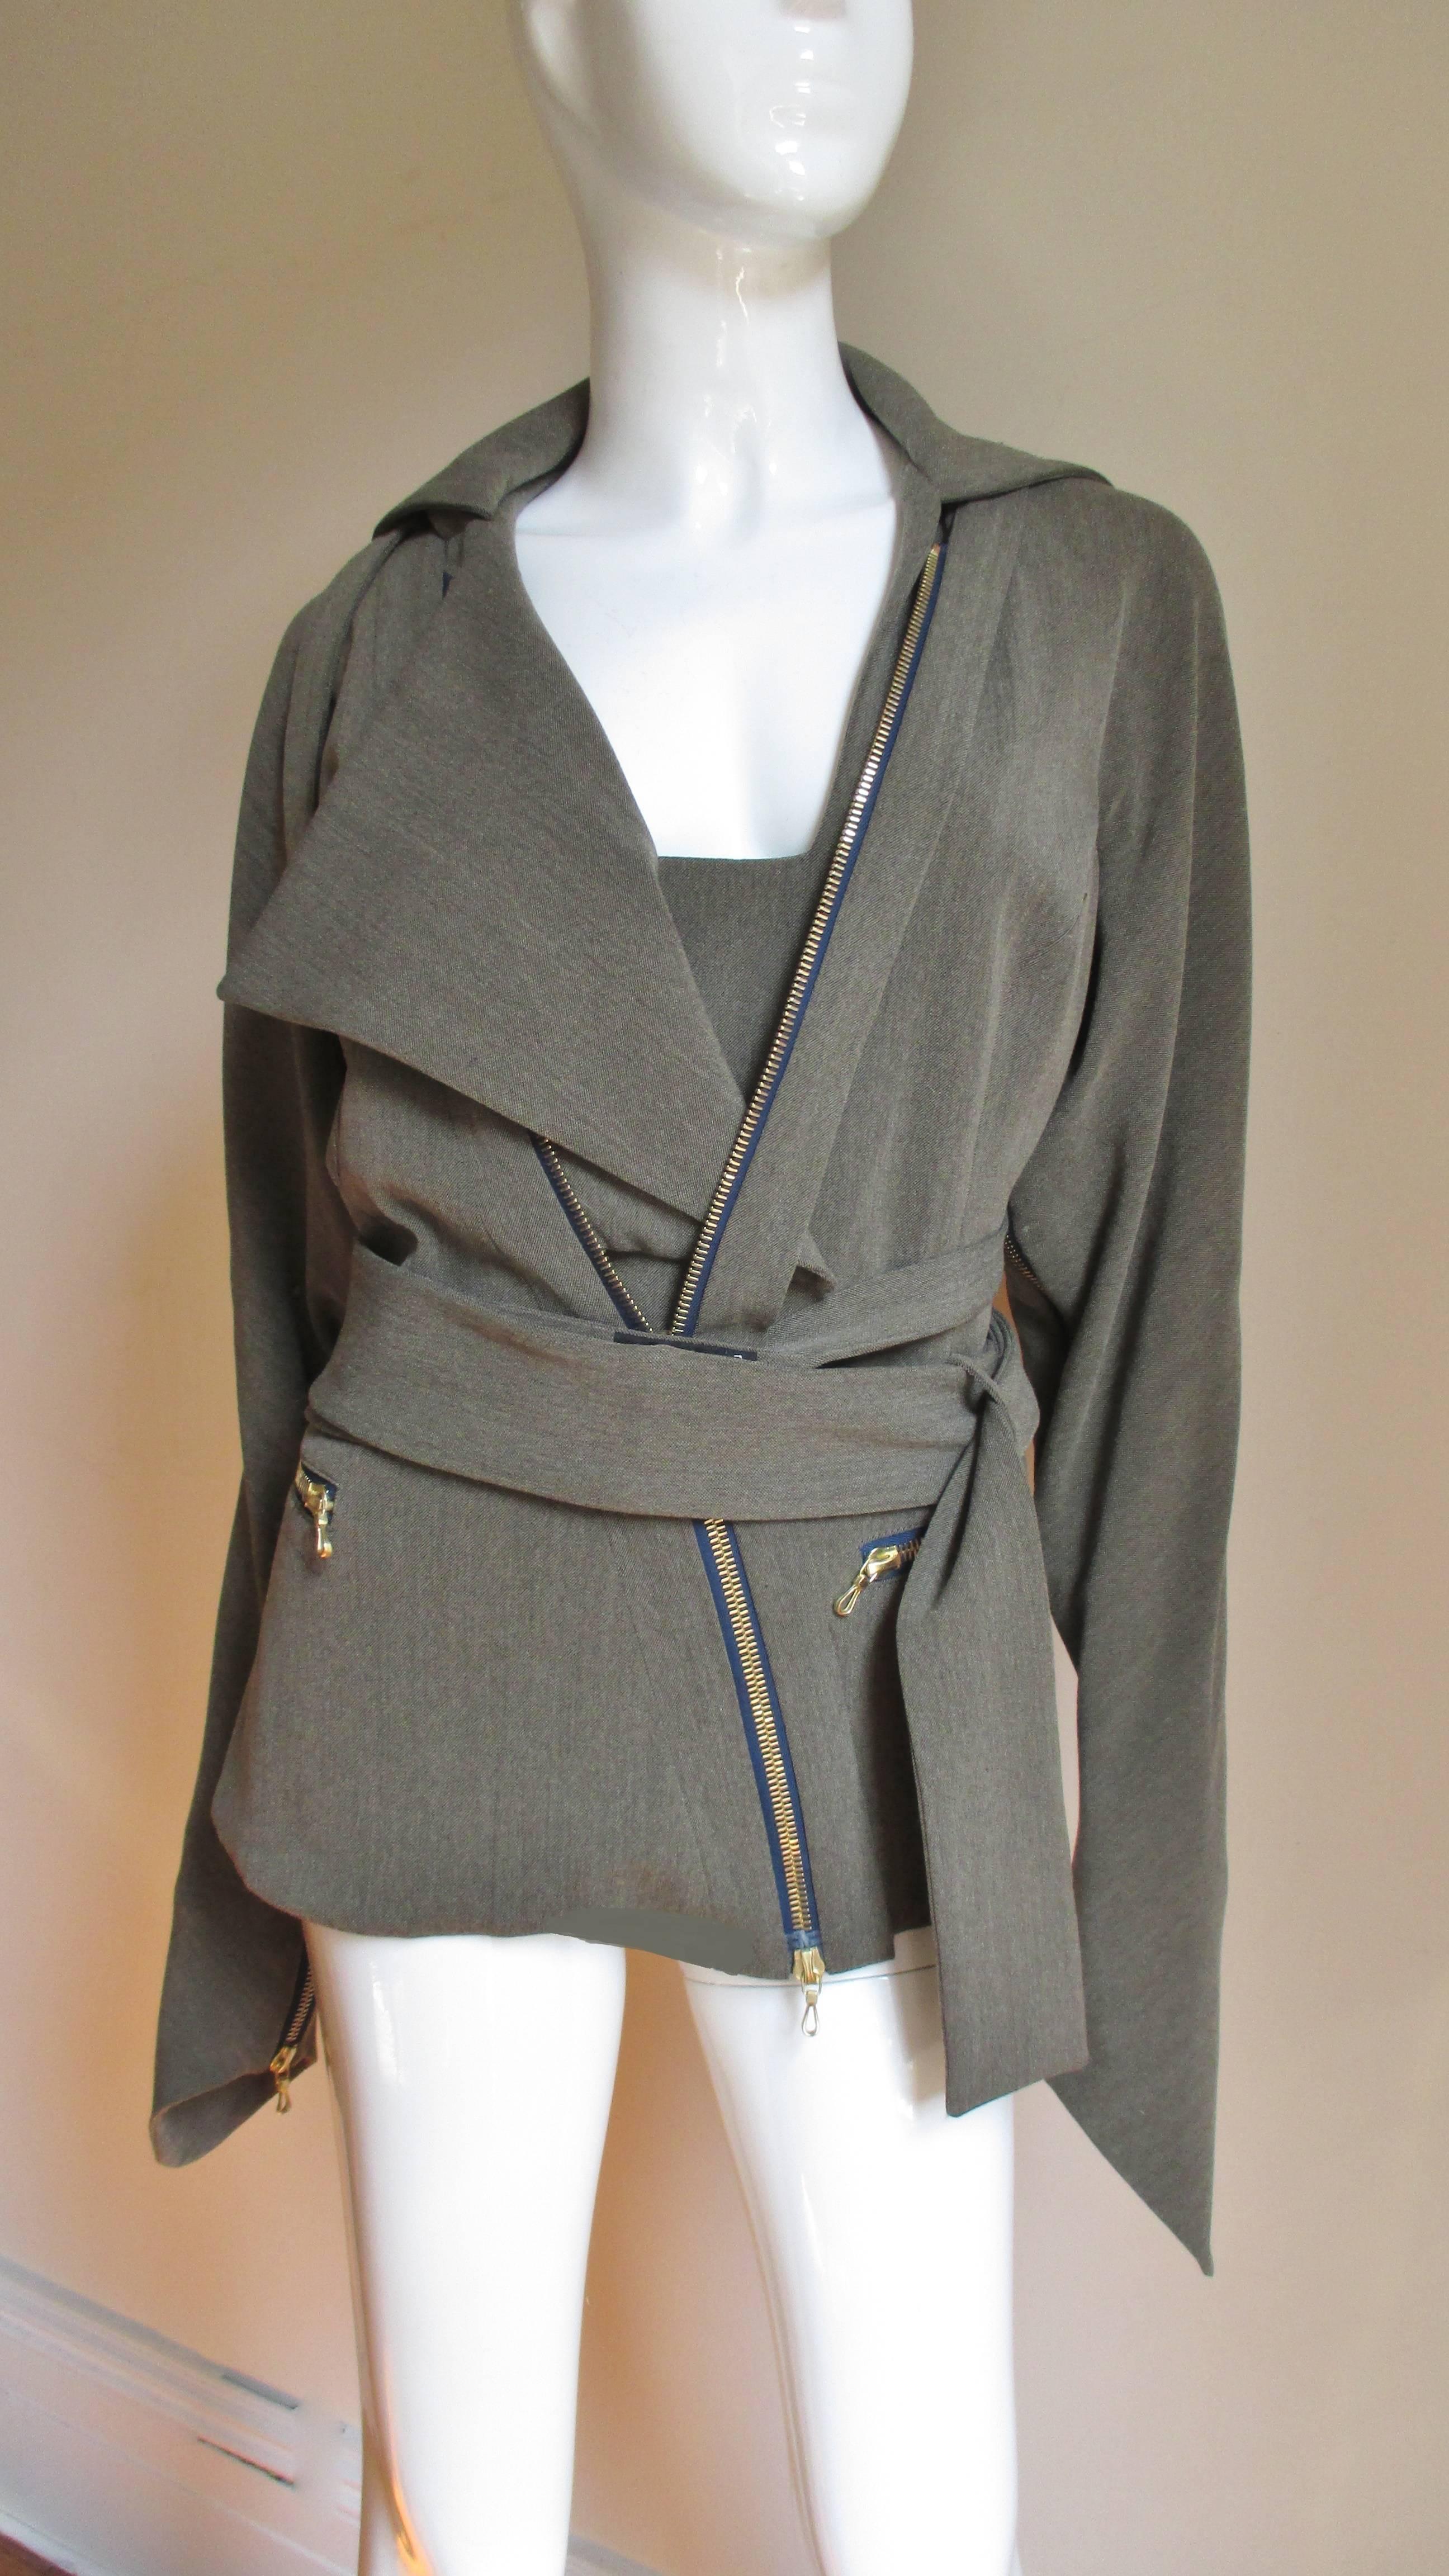 A fabulous olive wool jacket from Vivienne Westwood's Gold label line. It has multiple straps emanating from the shoulders, front and back which can be configured in numerous ways plus the long pointed sleeves have the ability to unzip underneath